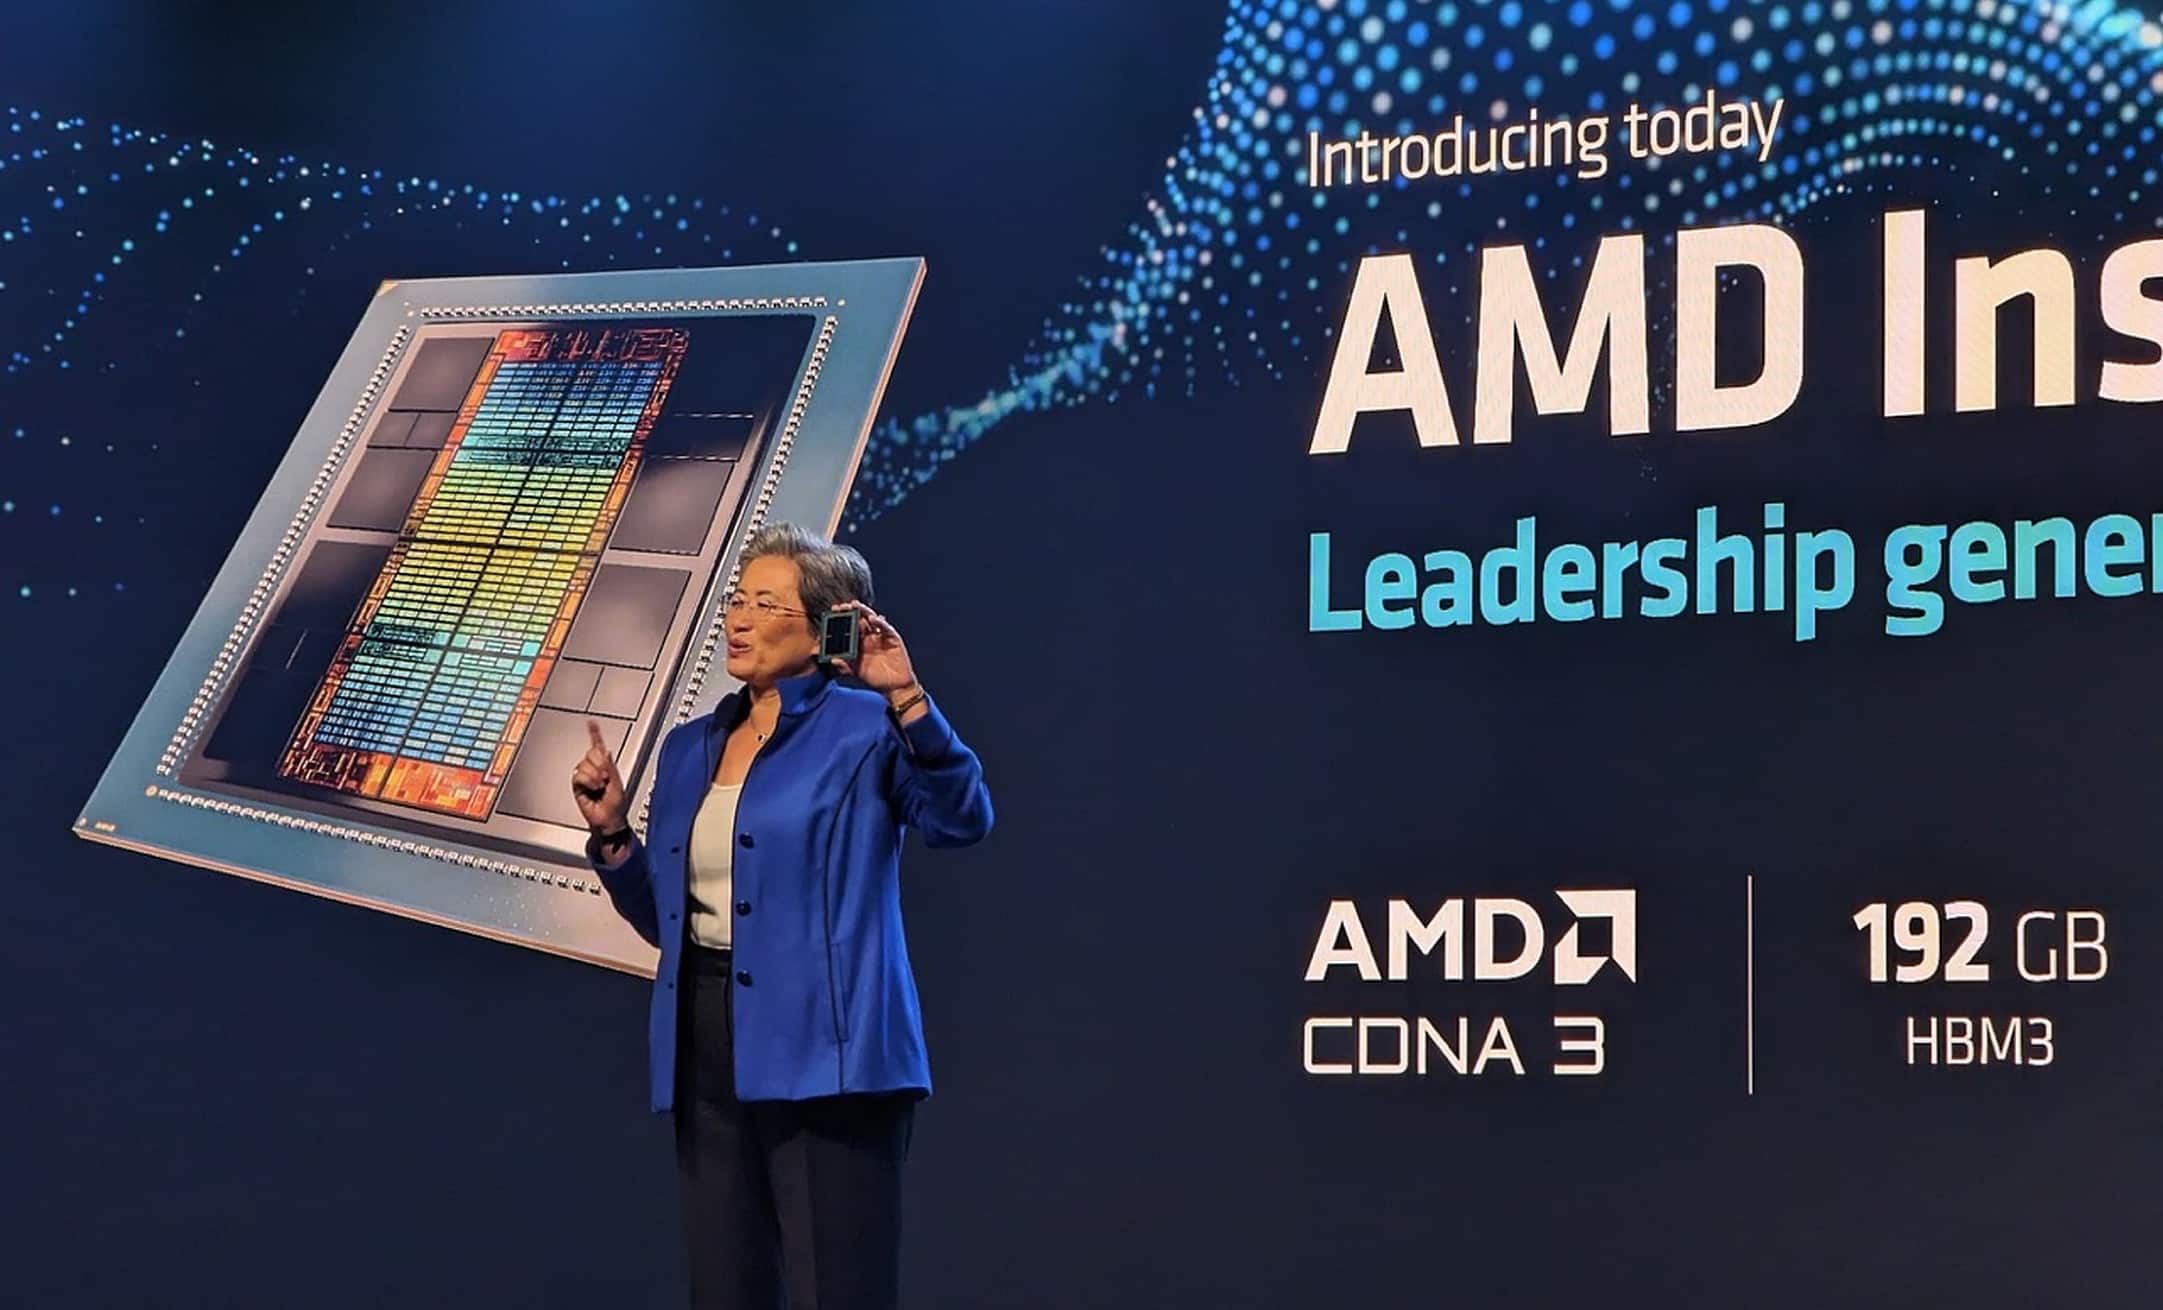 AMD unveils new AI chip: start the challenge with NVIDIA